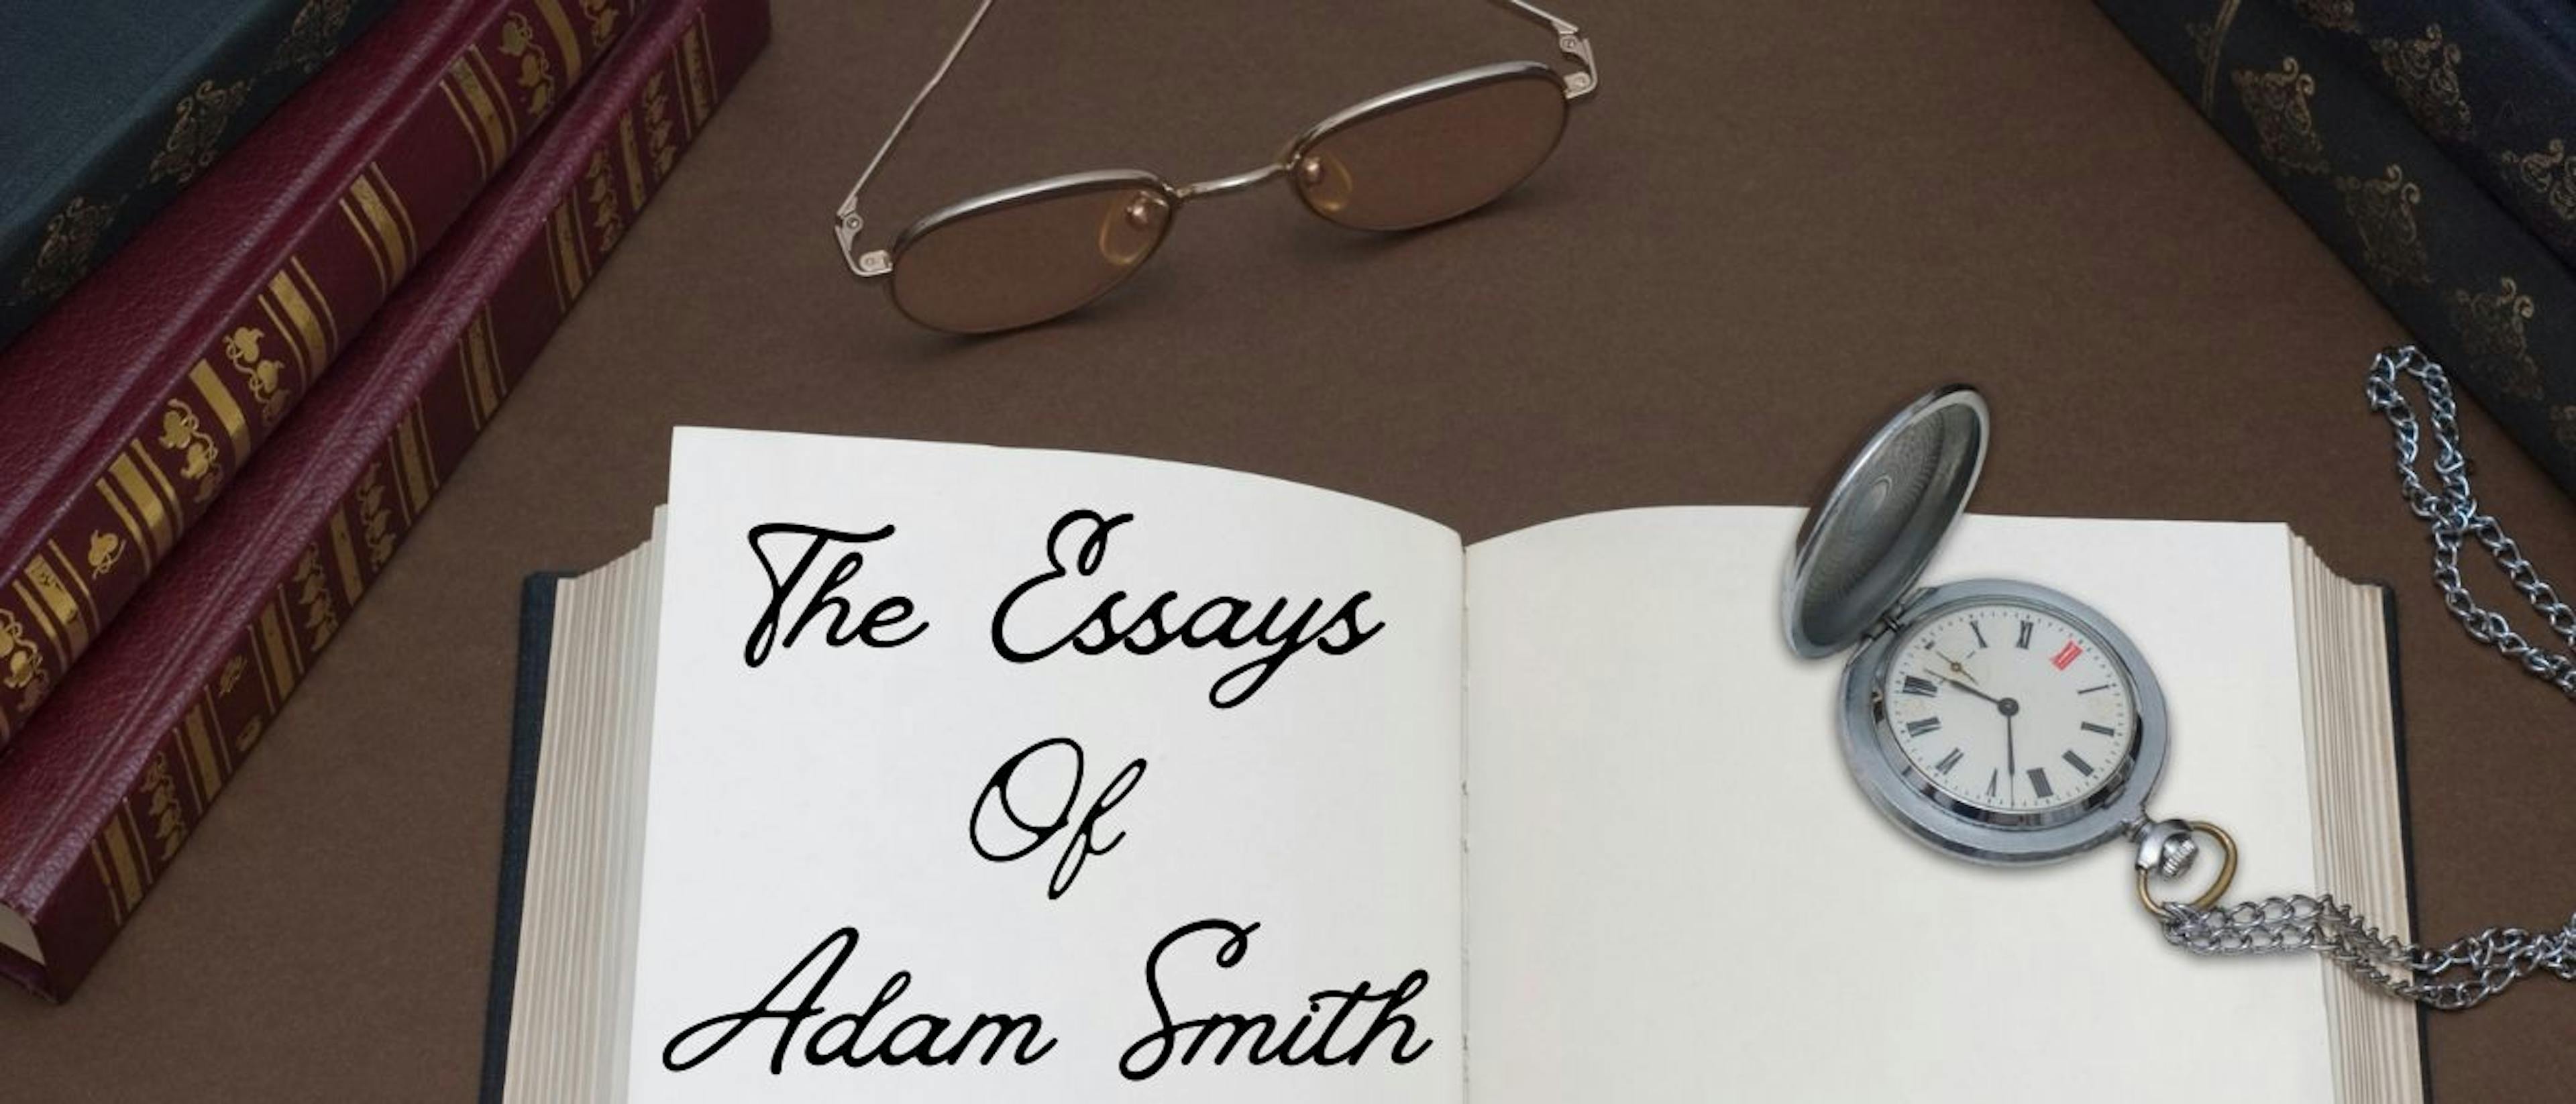 featured image - The Essays of Adam Smith: Part II, SEC. I, Chapter IV